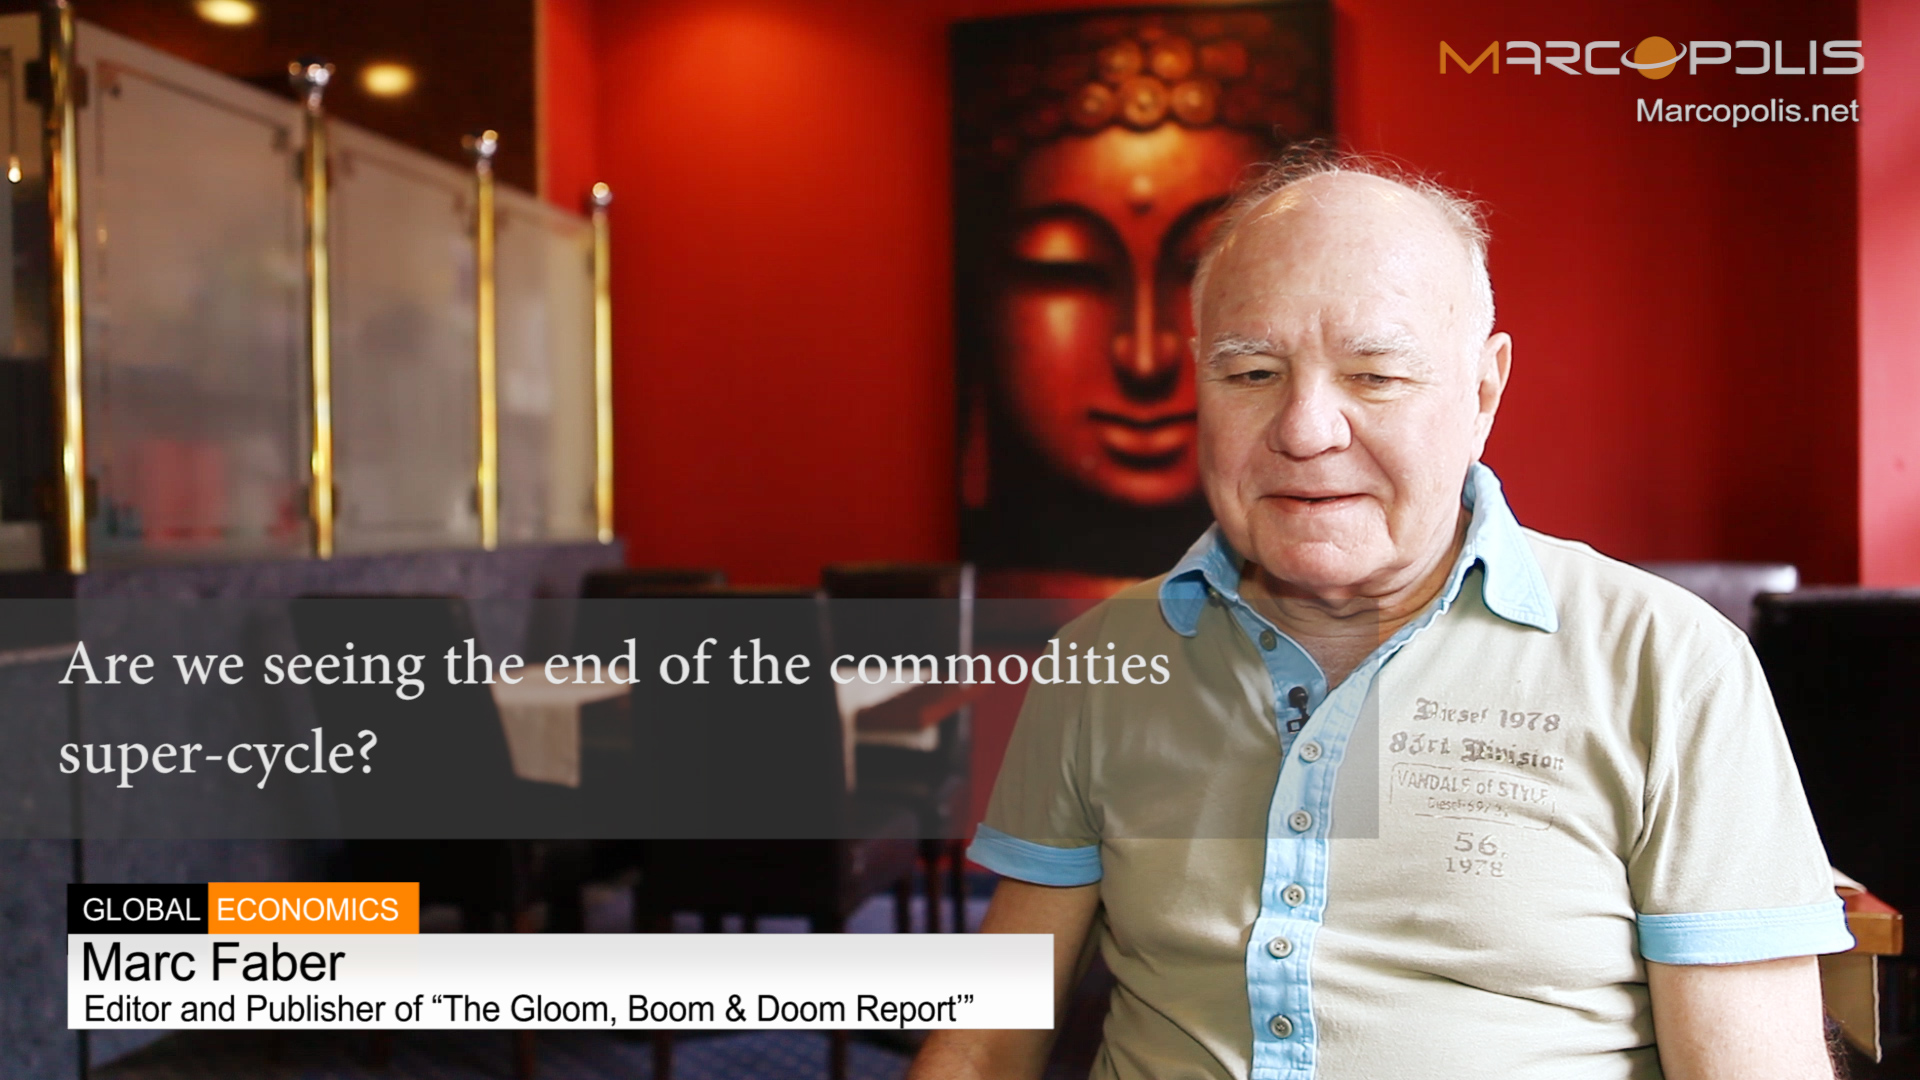 Marc Faber on commodities and commodities-super-cycle